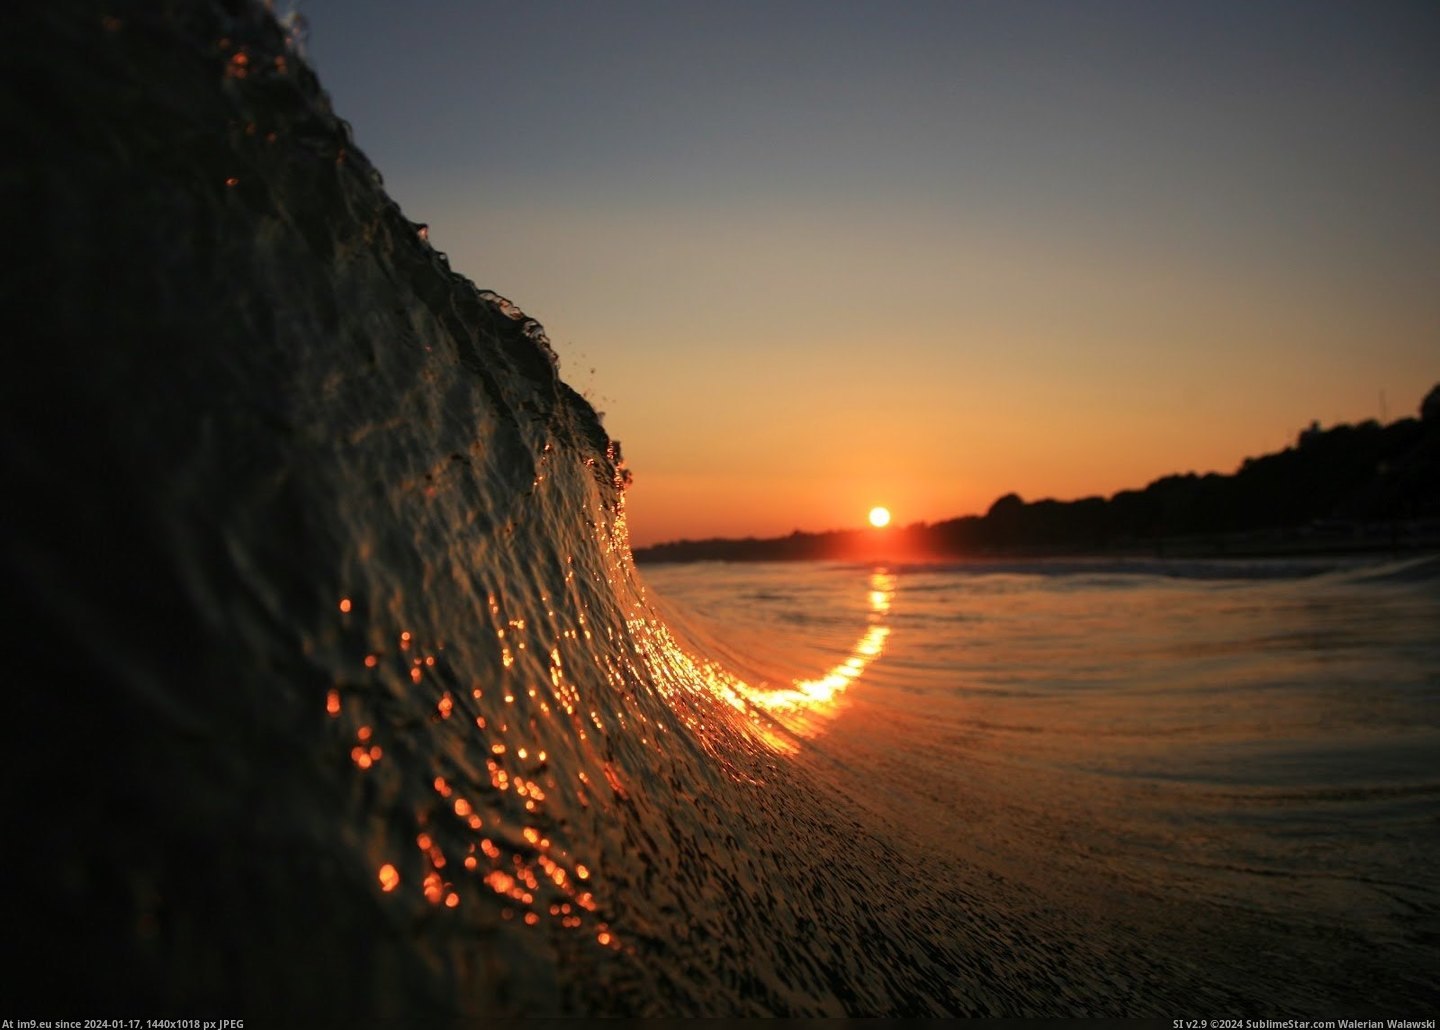 [Pics] Sunset curling up with a wave (in My r/PICS favs)